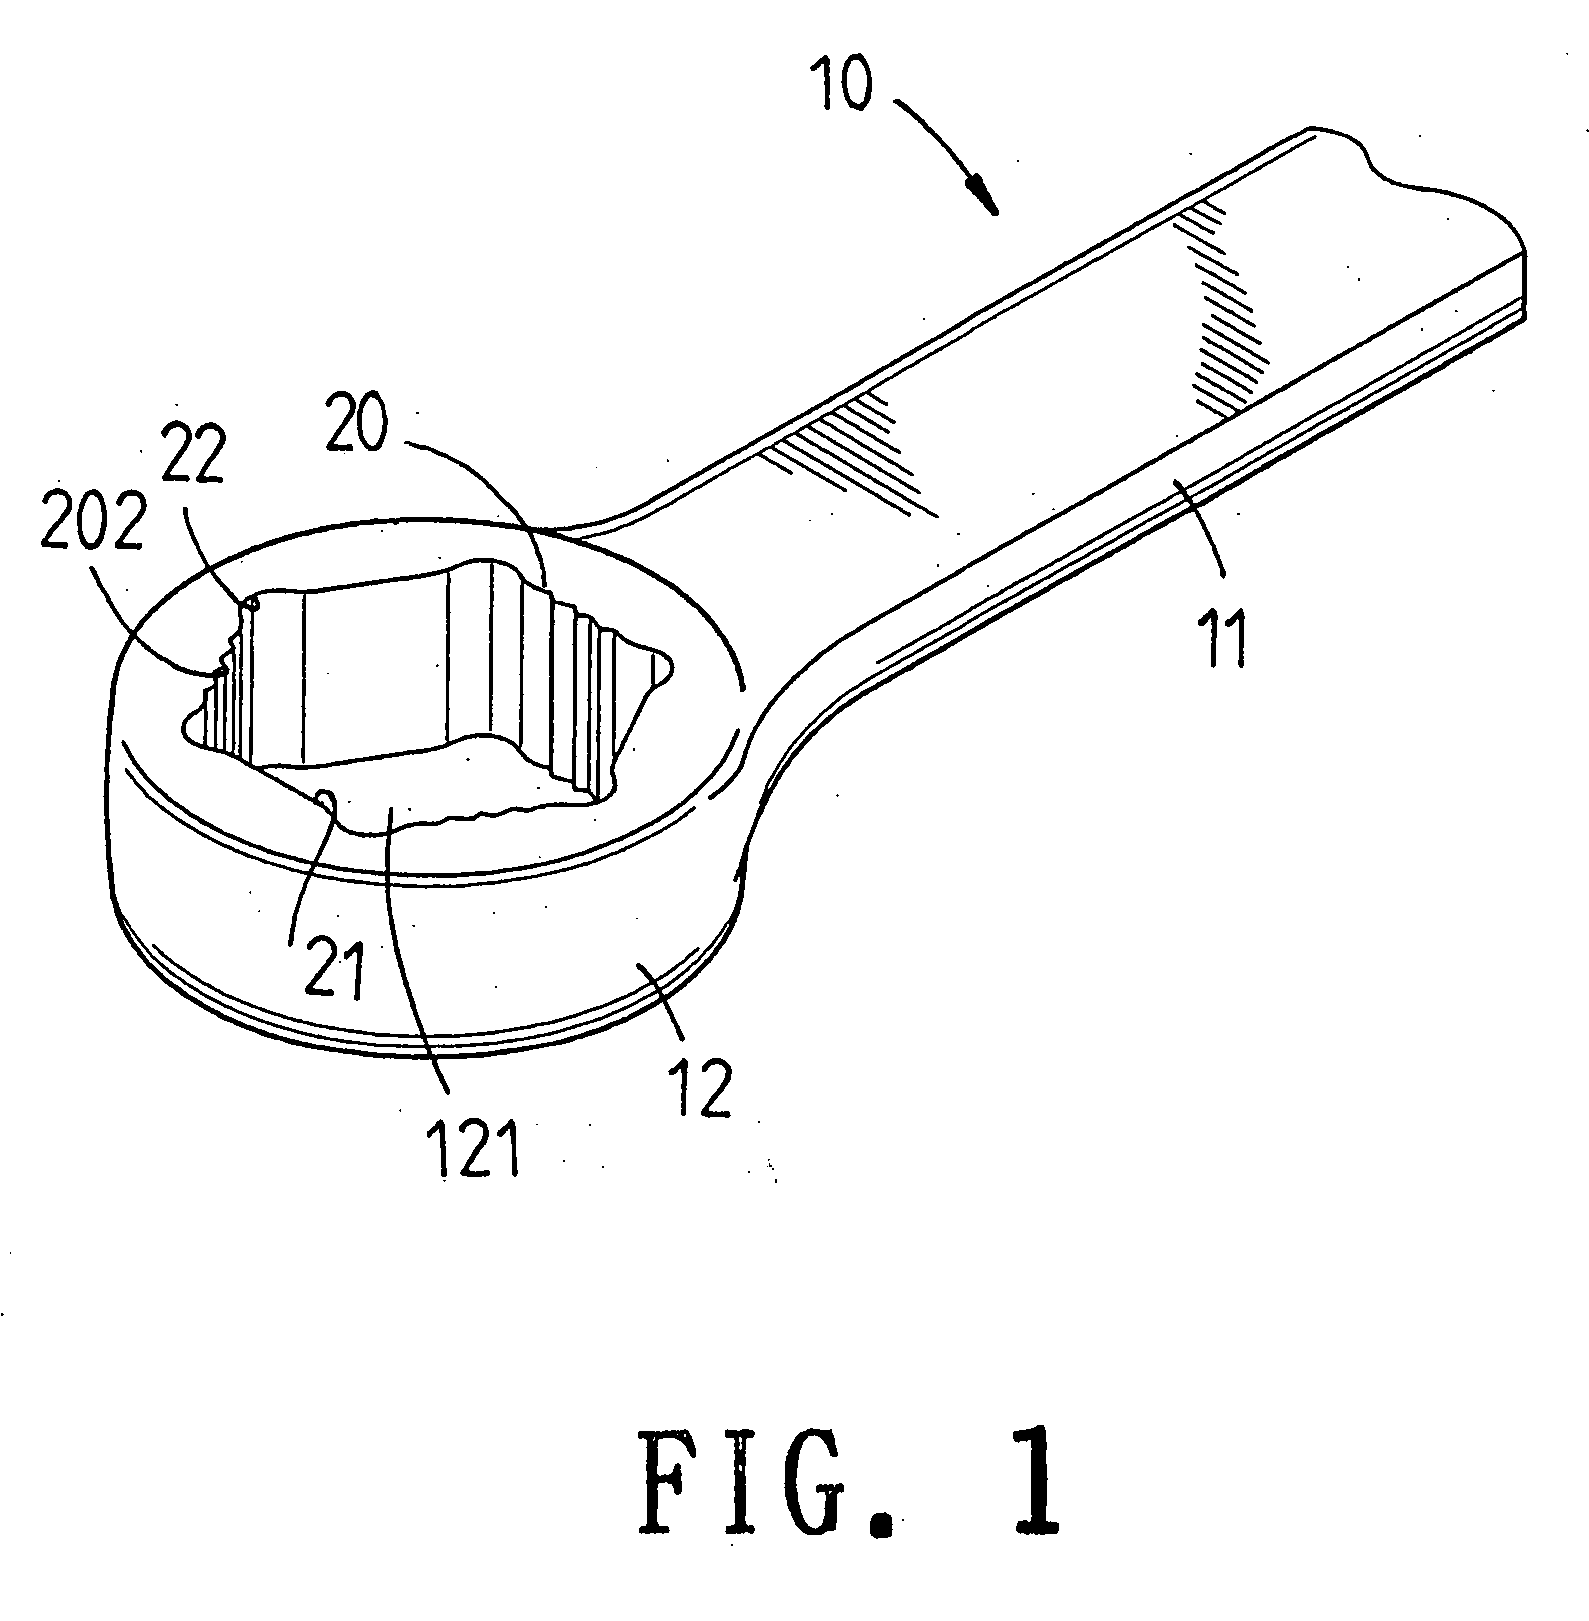 Clamping device for providing high twisting forces and low damage to screw device